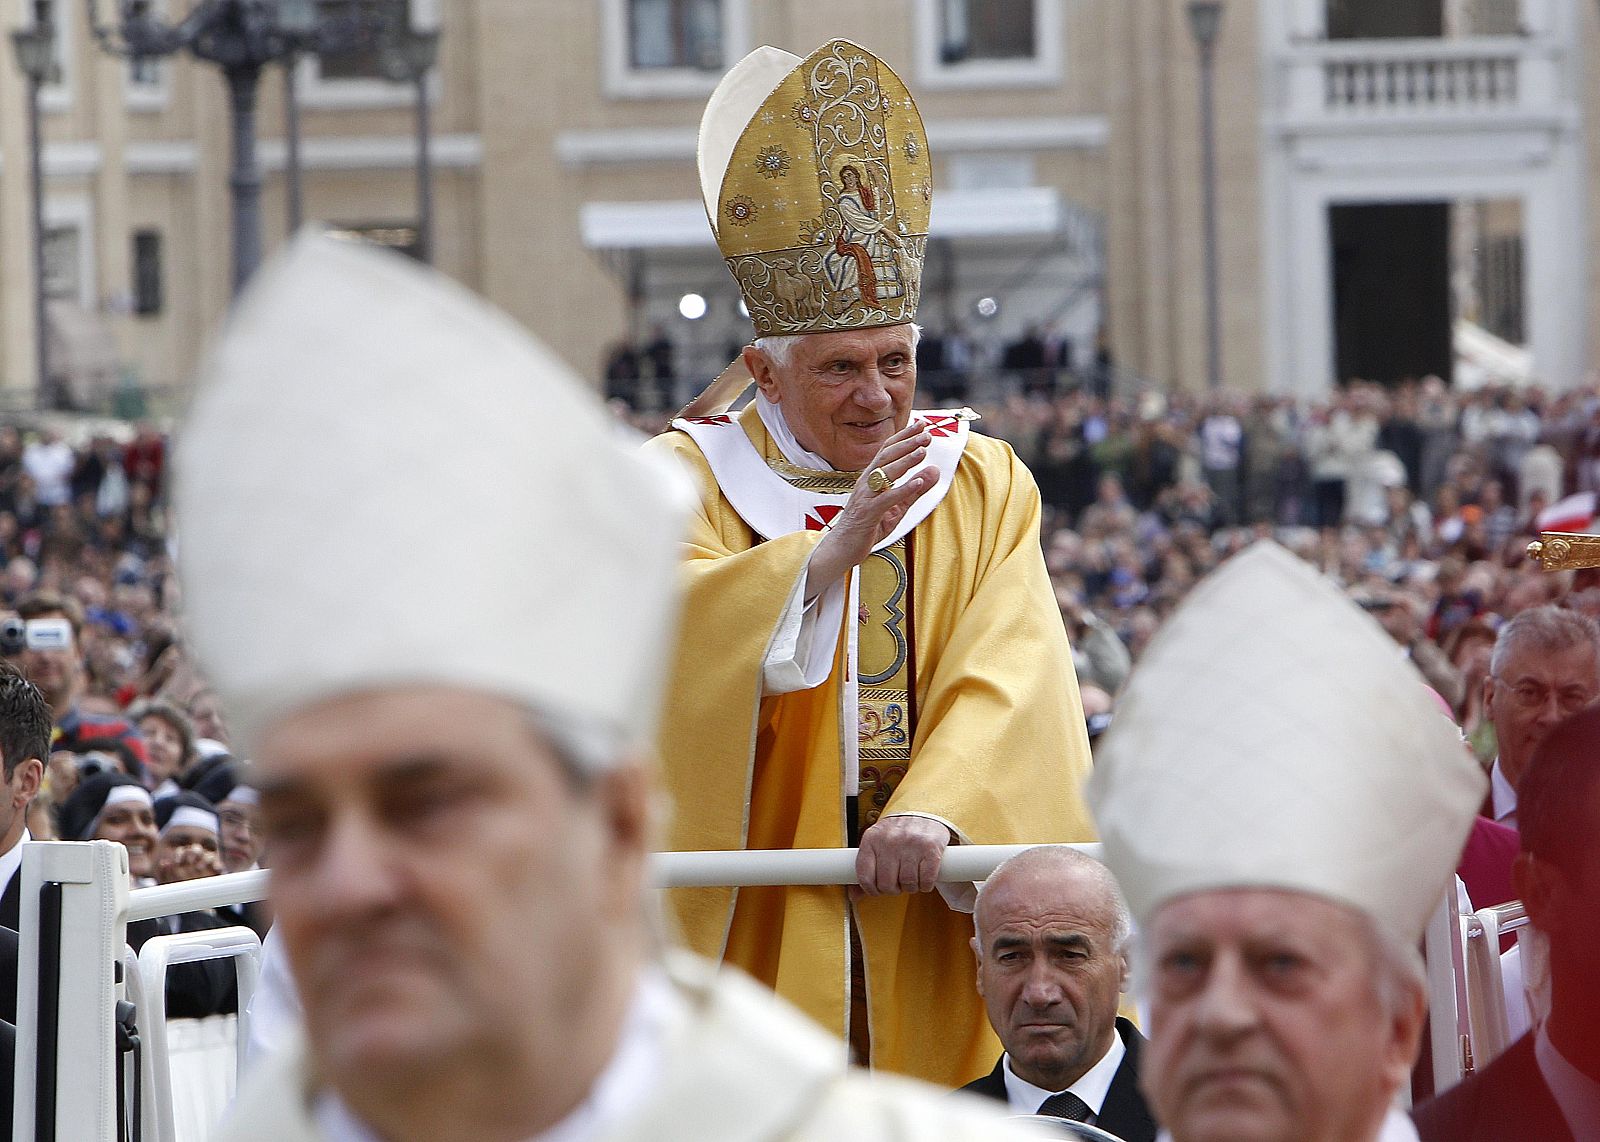 Pope Benedict XVI waves as he arrives to lead a solemn canonisation mass in Saint Peter's square at the Vatican